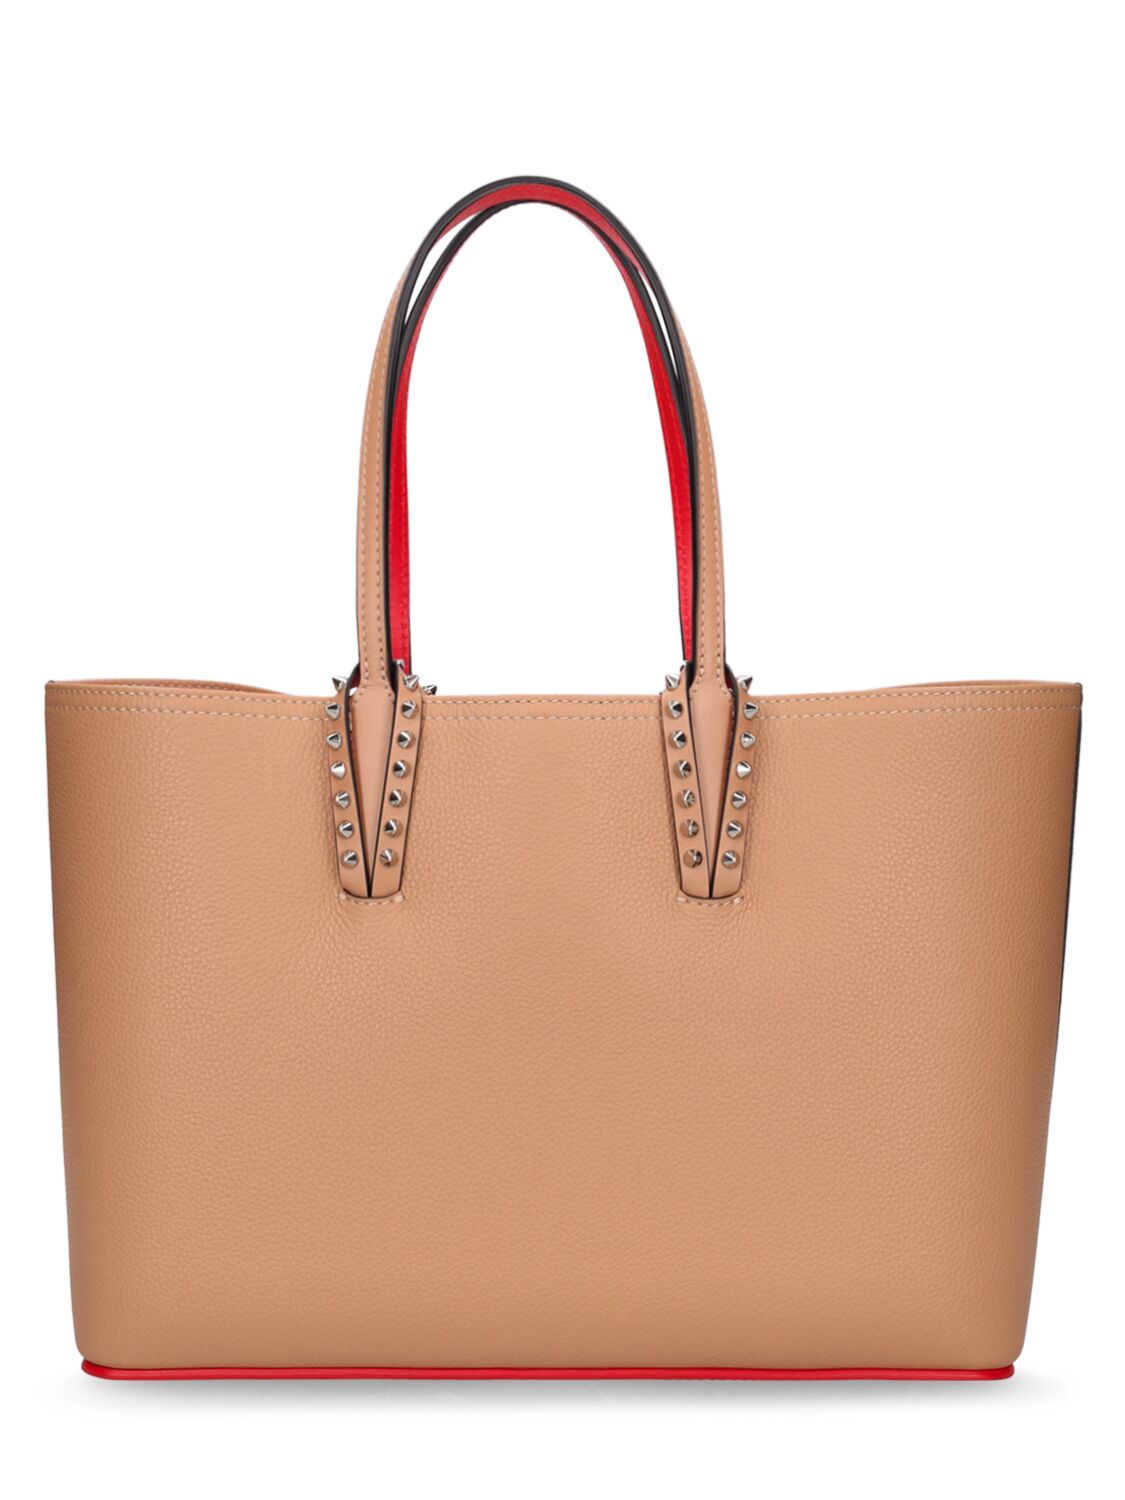 Shop Christian Louboutin Small Cabata Leather Tote Bag In Nude